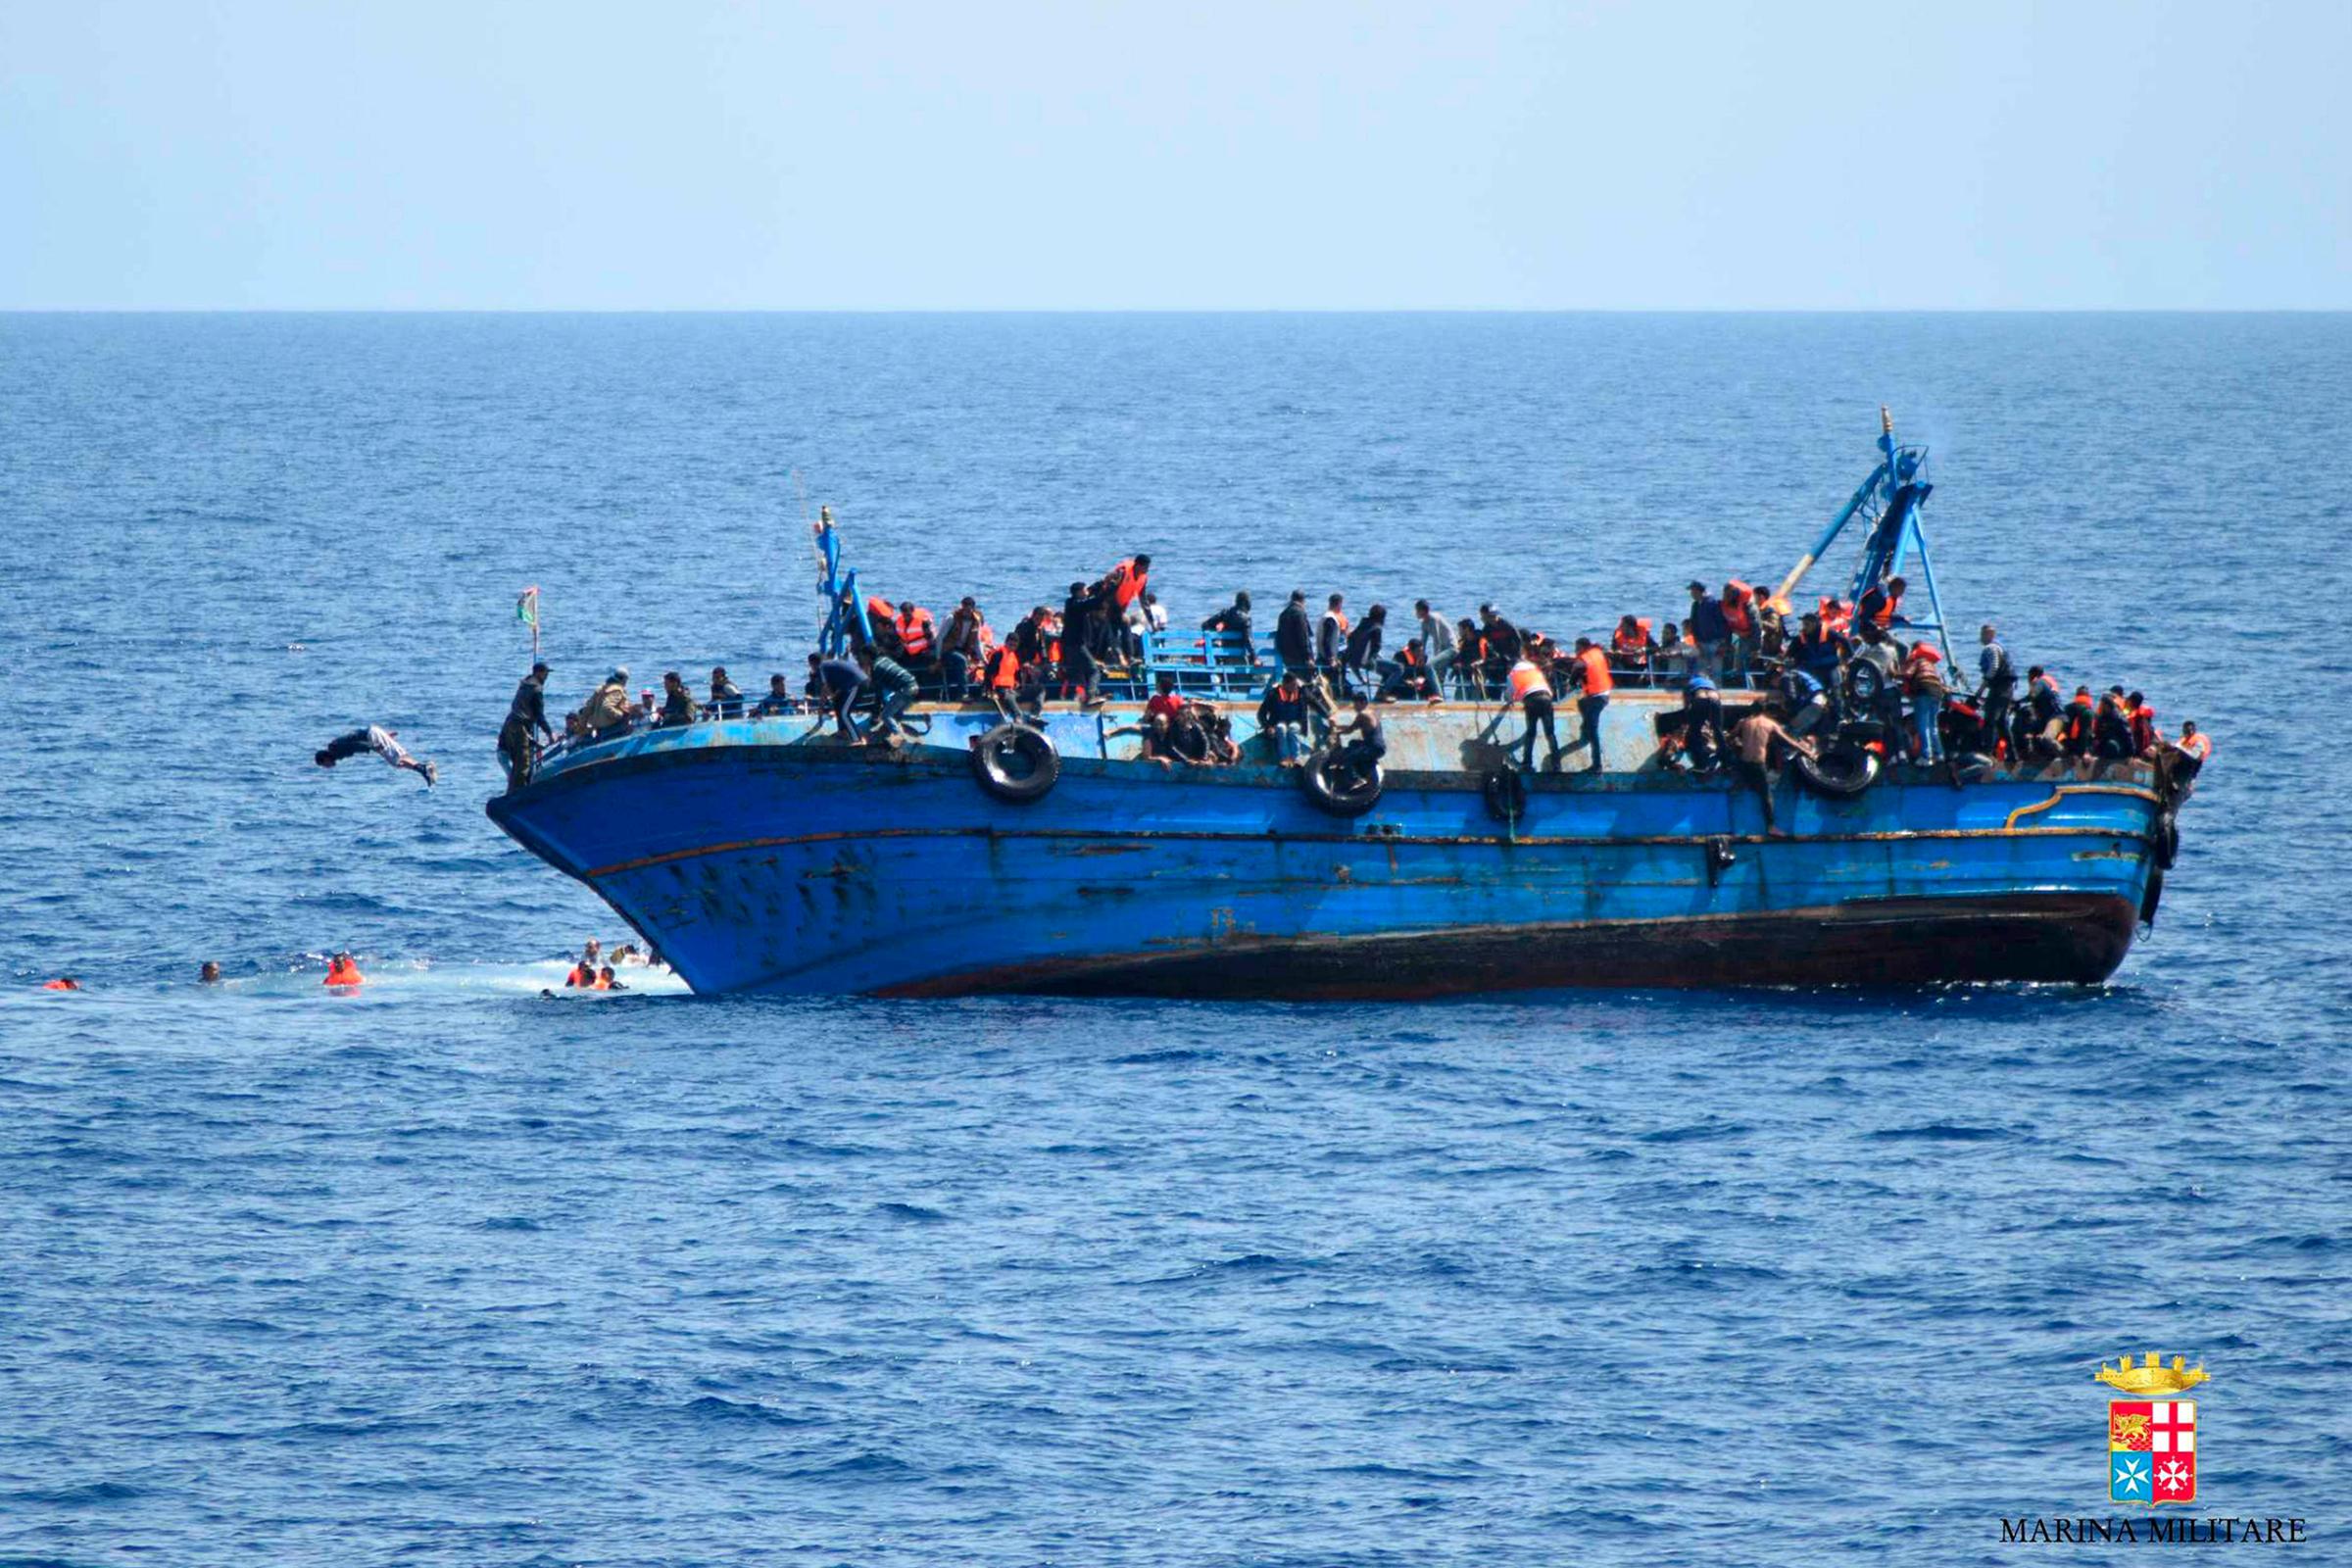 This handout picture released on May 25, 2016 by the Italian Navy (Marina Militare) shows the shipwreck of an overcrowded boat of migrants off the Libyan coast today. At least seven migrants have drowned after the heavily overcrowded boat they were sailing on overturned, the Italian navy said. The navy said 500 people had been pulled to safety and seven bodies recovered, but rescue operations were continuing and the death toll could rise. The navy's Bettica patrol boat spotted "a boat in precarious conditions off the coast of Libya with numerous migrants aboard," it said in a statement. / AFP PHOTO / MARINA MILITARE / STR / RESTRICTED TO EDITORIAL USE - MANDATORY CREDIT "AFP PHOTO / MARINA MILITARE" - NO MARKETING NO ADVERTISING CAMPAIGNS - DISTRIBUTED AS A SERVICE TO CLIENTS STR/AFP/Getty Images